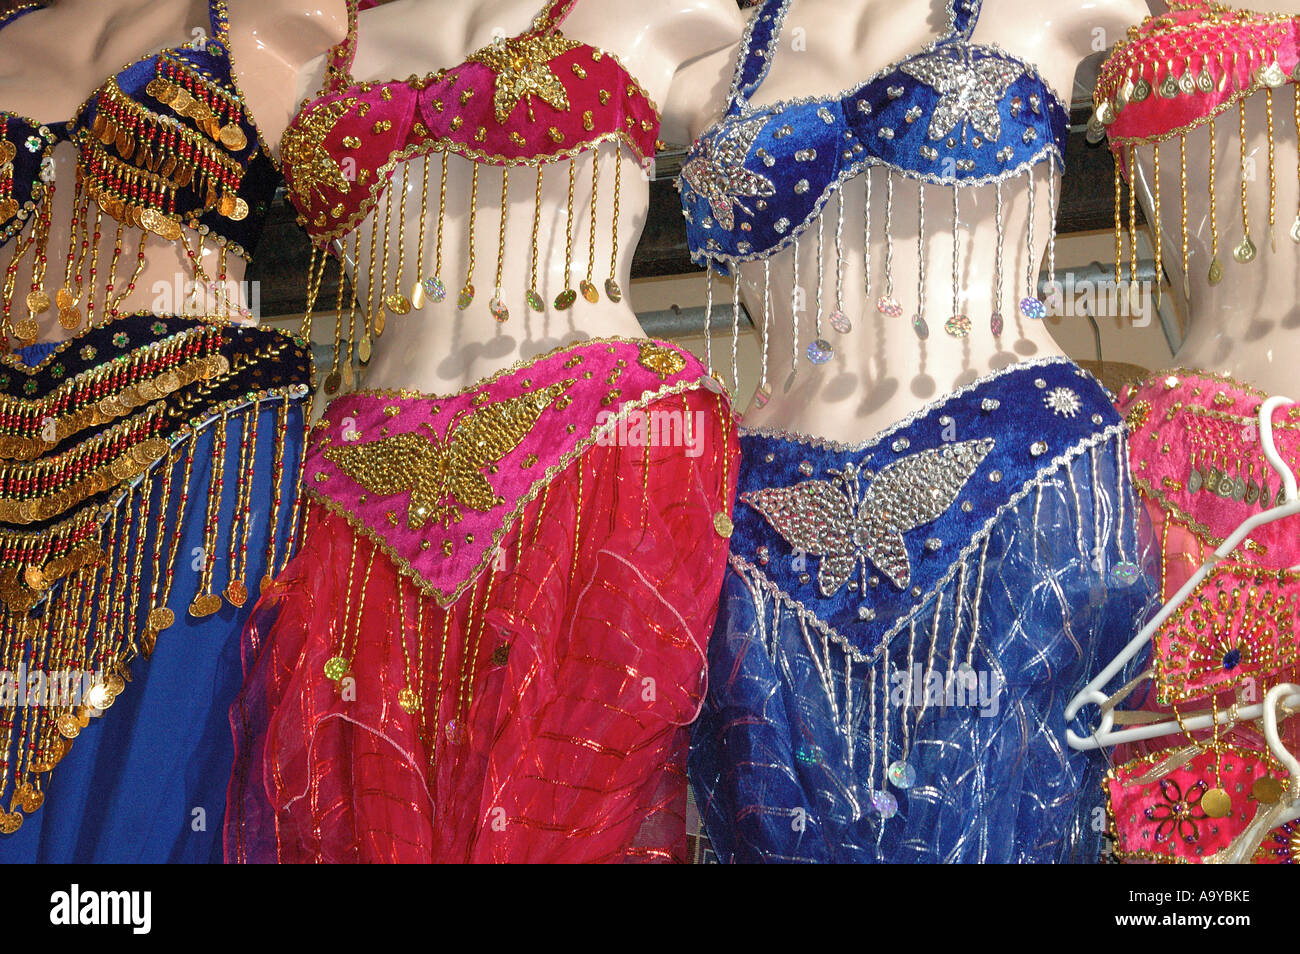 A row of belly dancing outfits for sale 